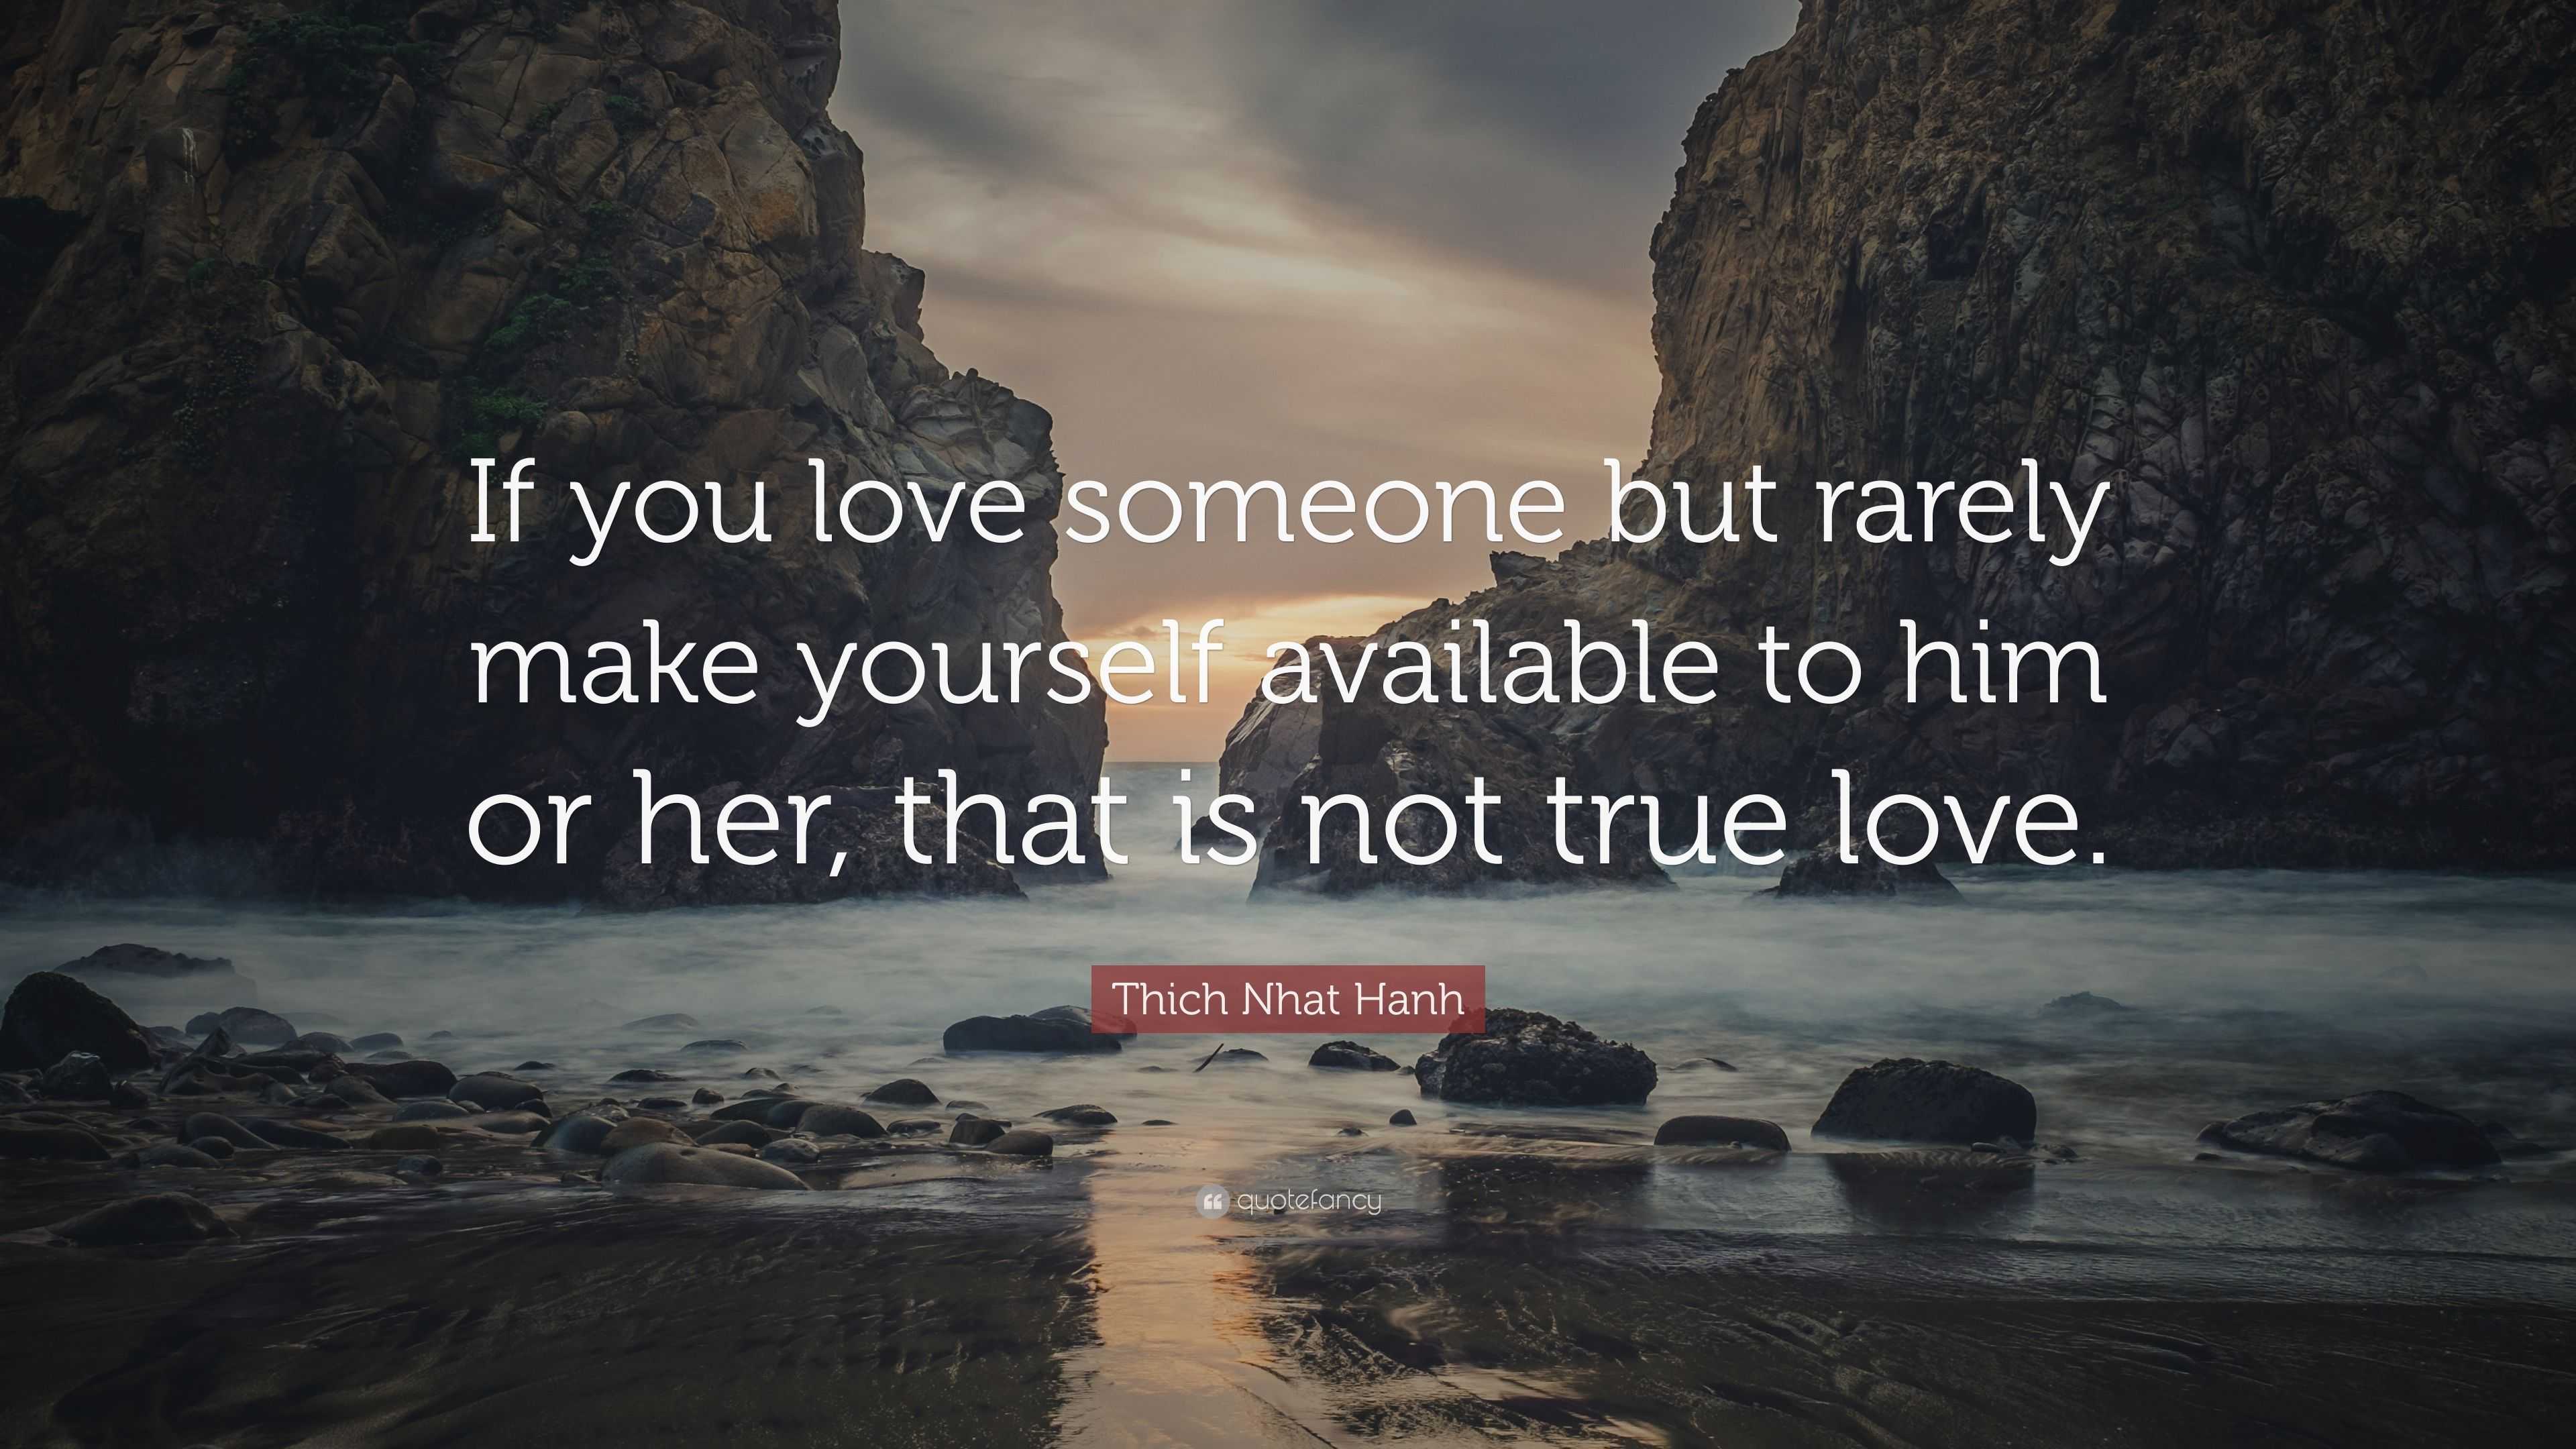 true love by thich nhat hanh